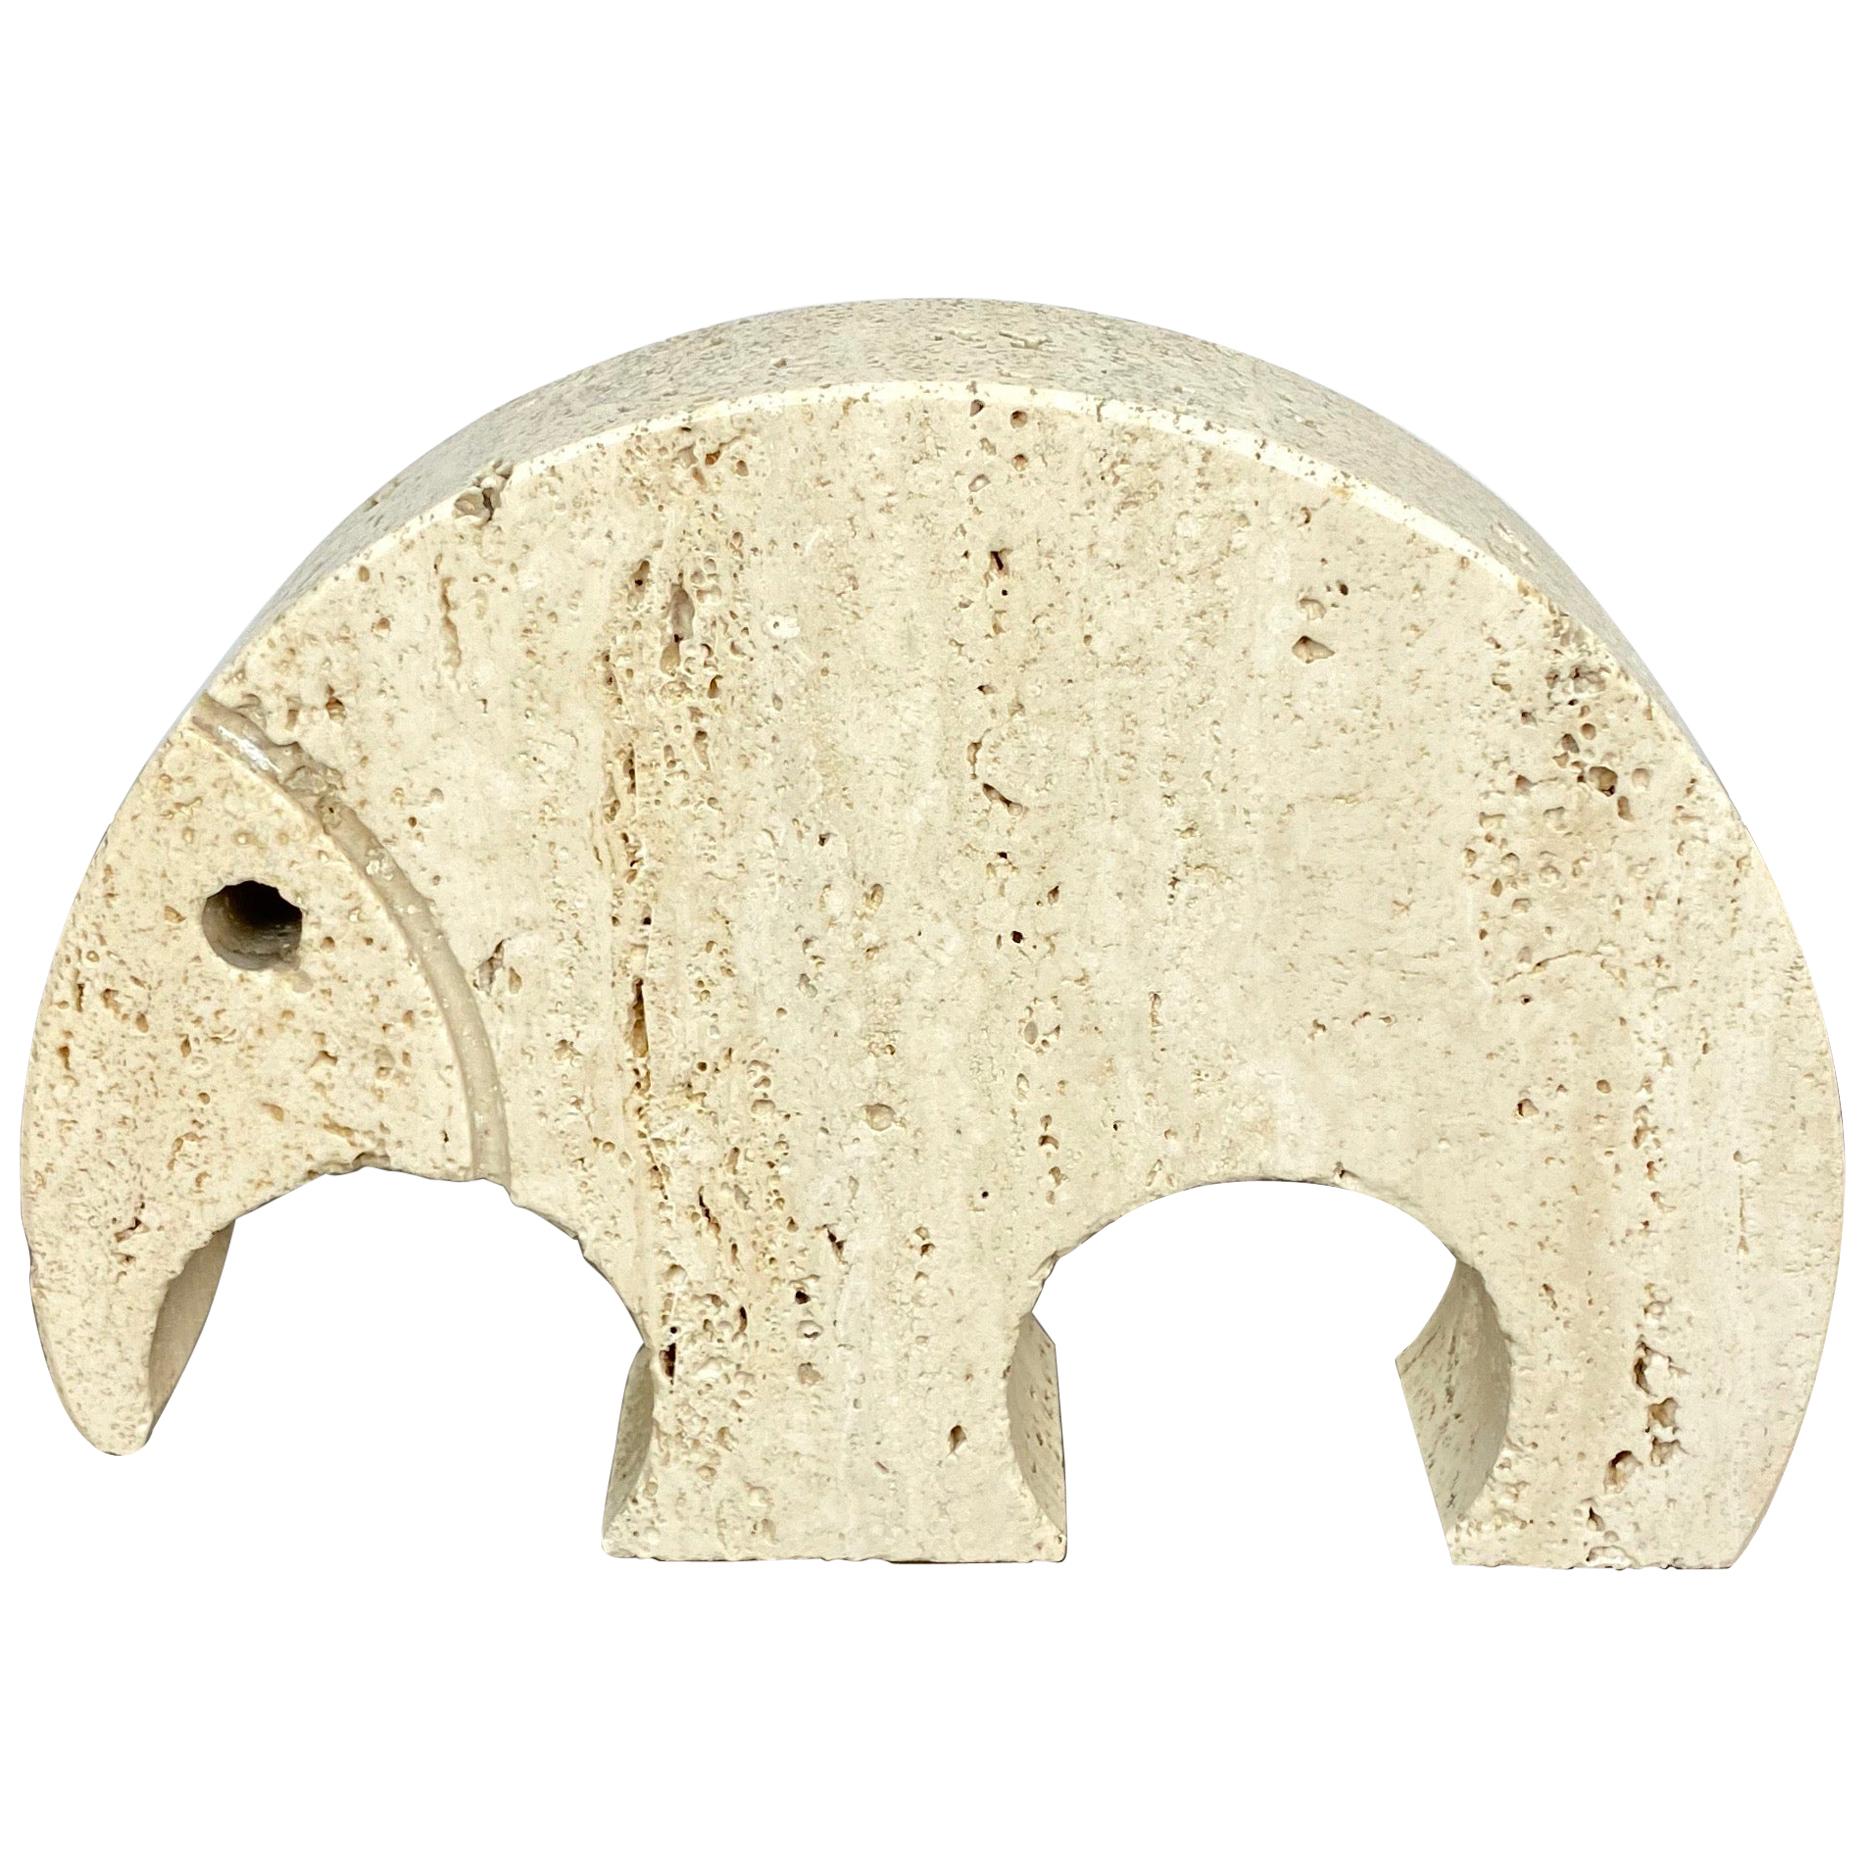 Anteater Travertine Paperweight Sculpture by Fratelli Mannelli, Italy, 1970s